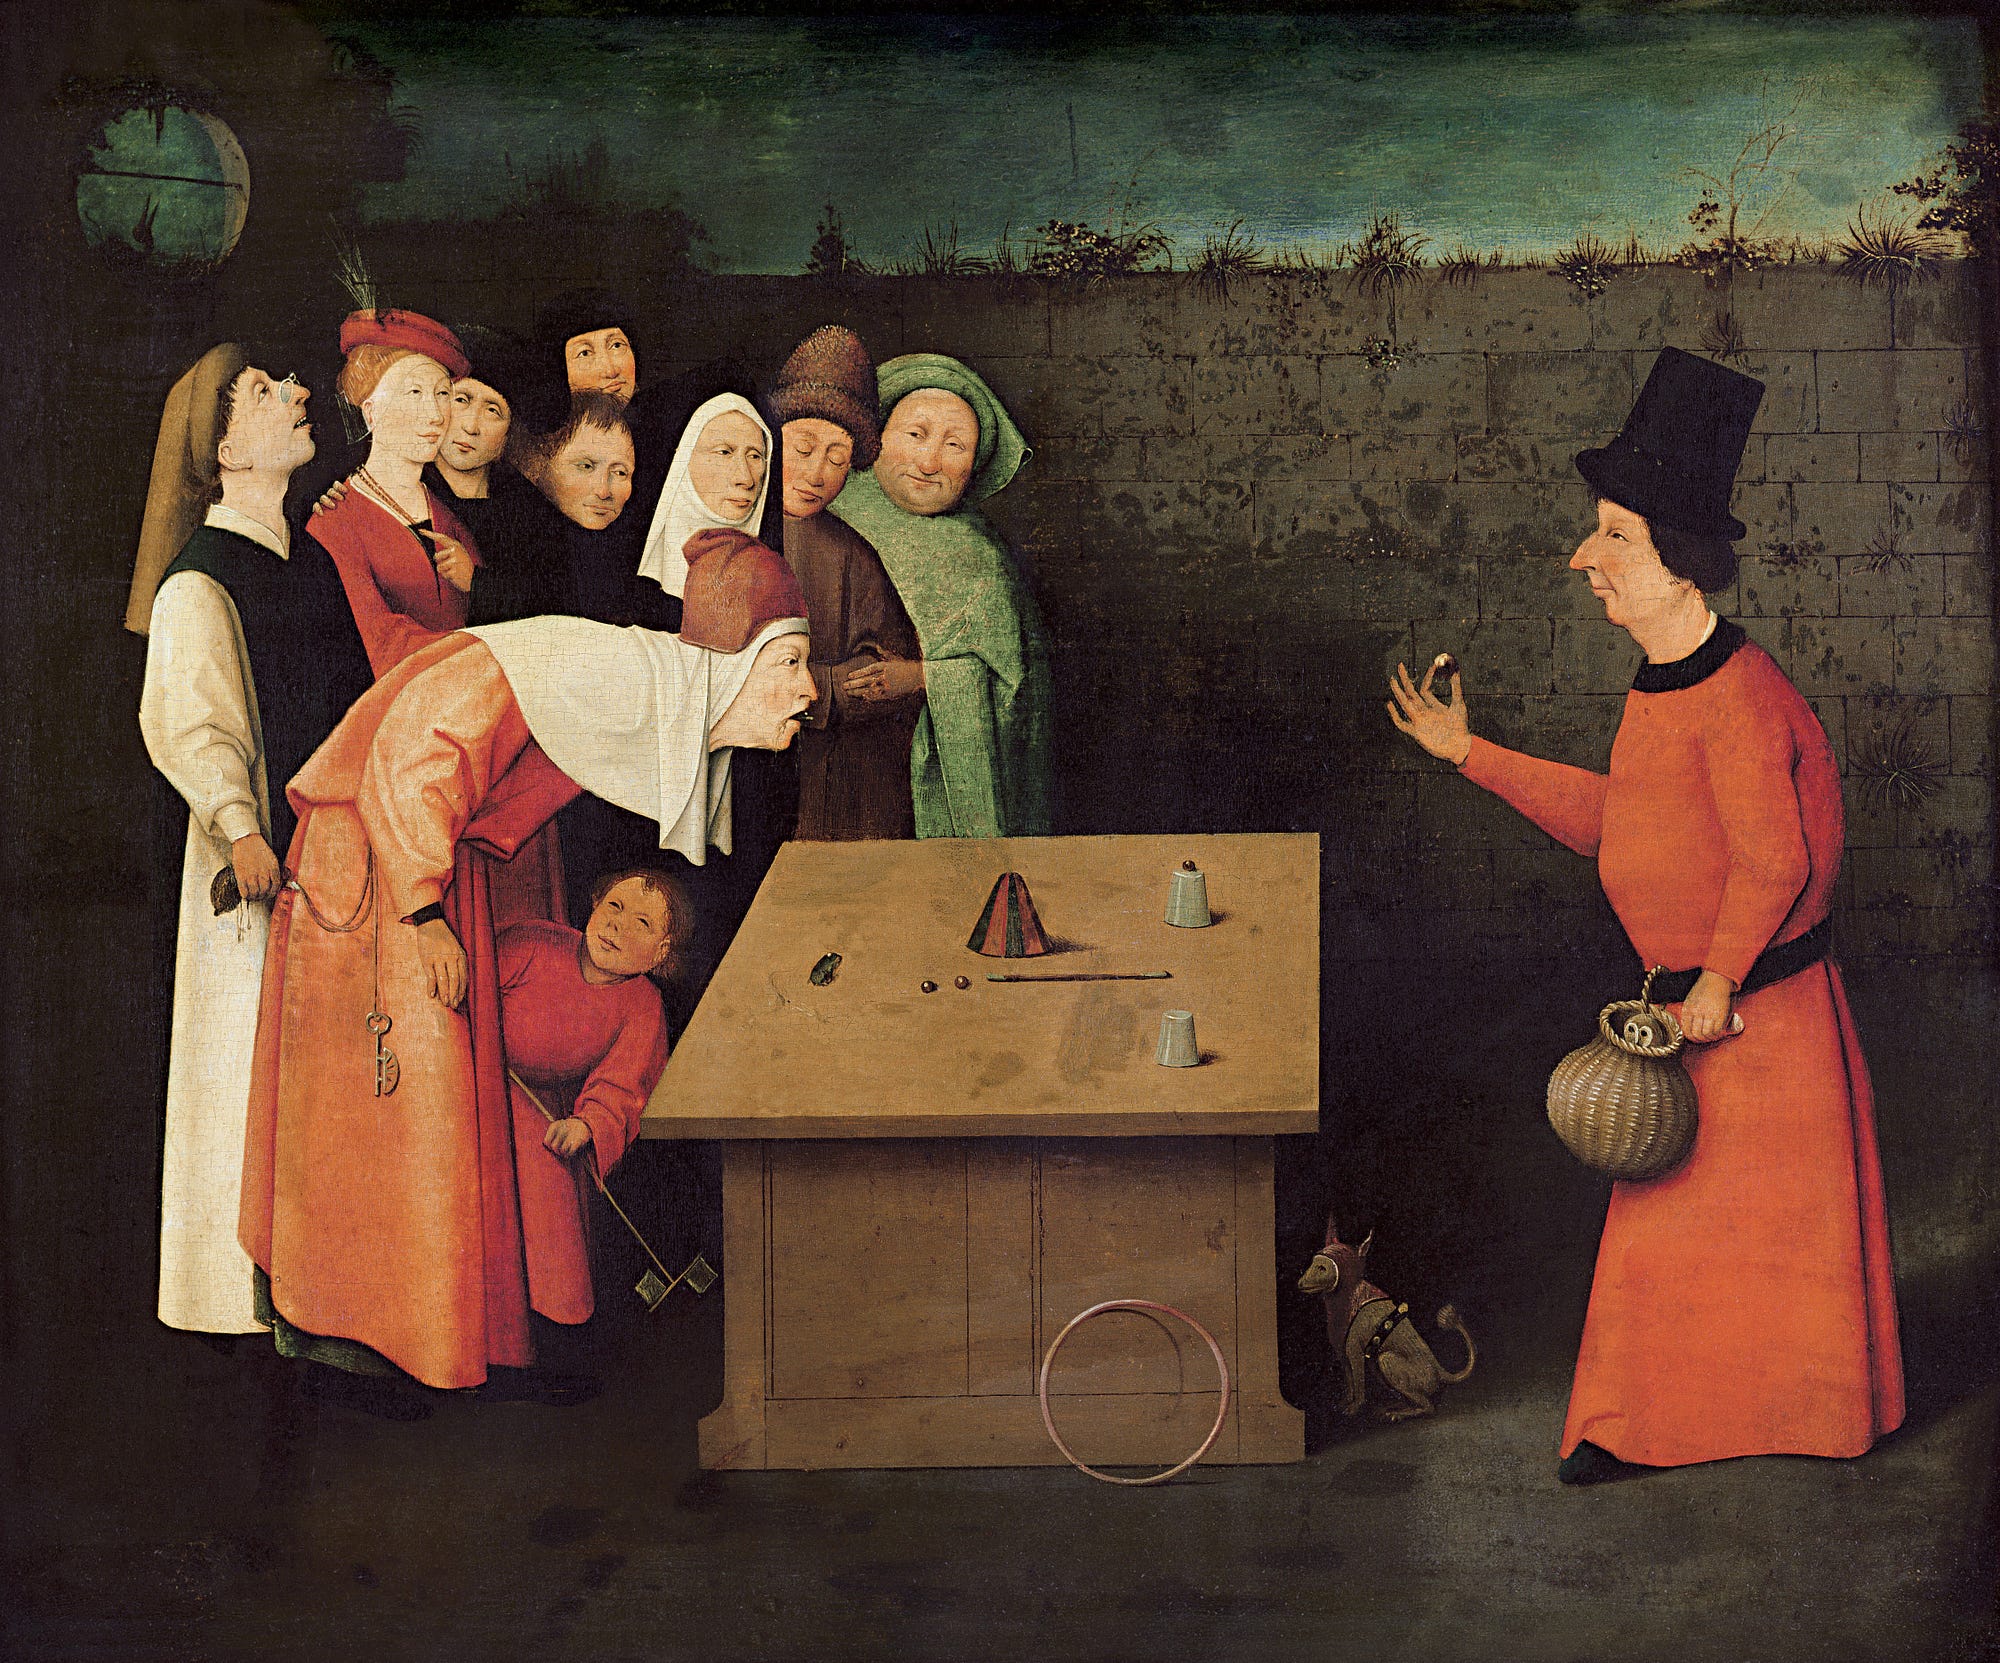 A painting by Hieronymus Bosch that depicts what seems to be a magic trick, but is actually fraud and shows how people are fooled by lack of alertness and insight